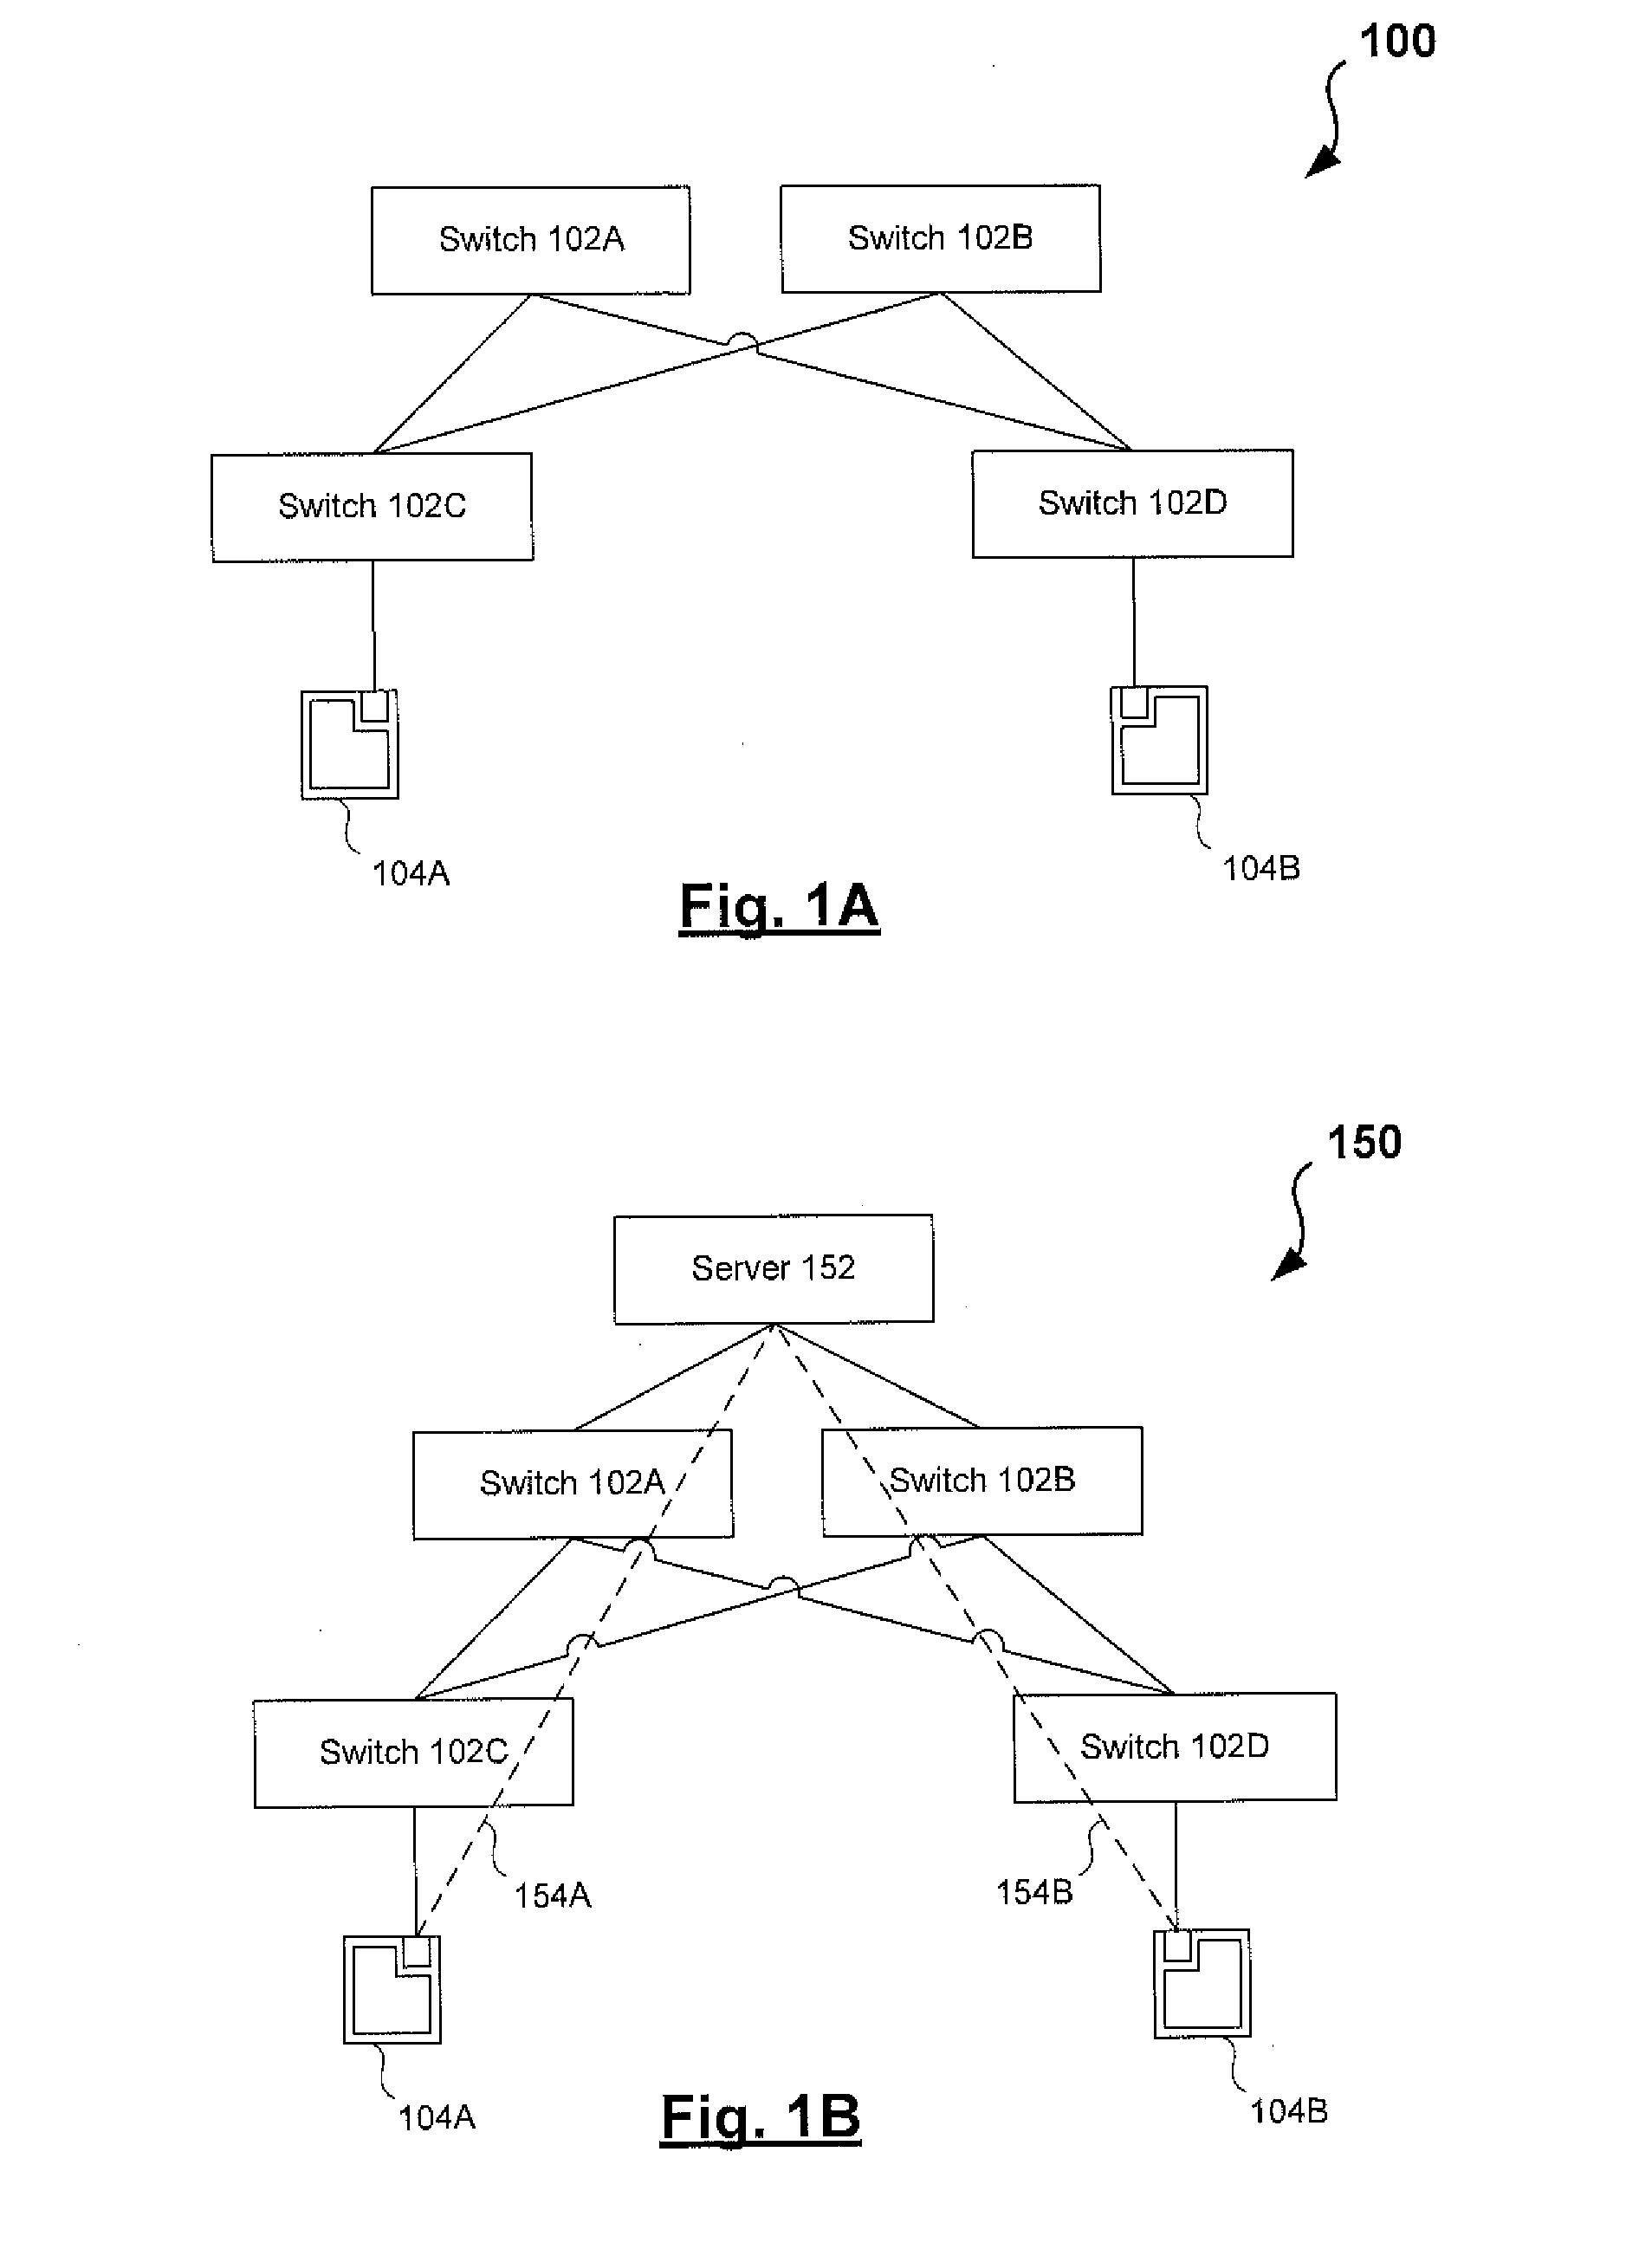 Systems and methods for integrating wireless local area networks on extended bridges